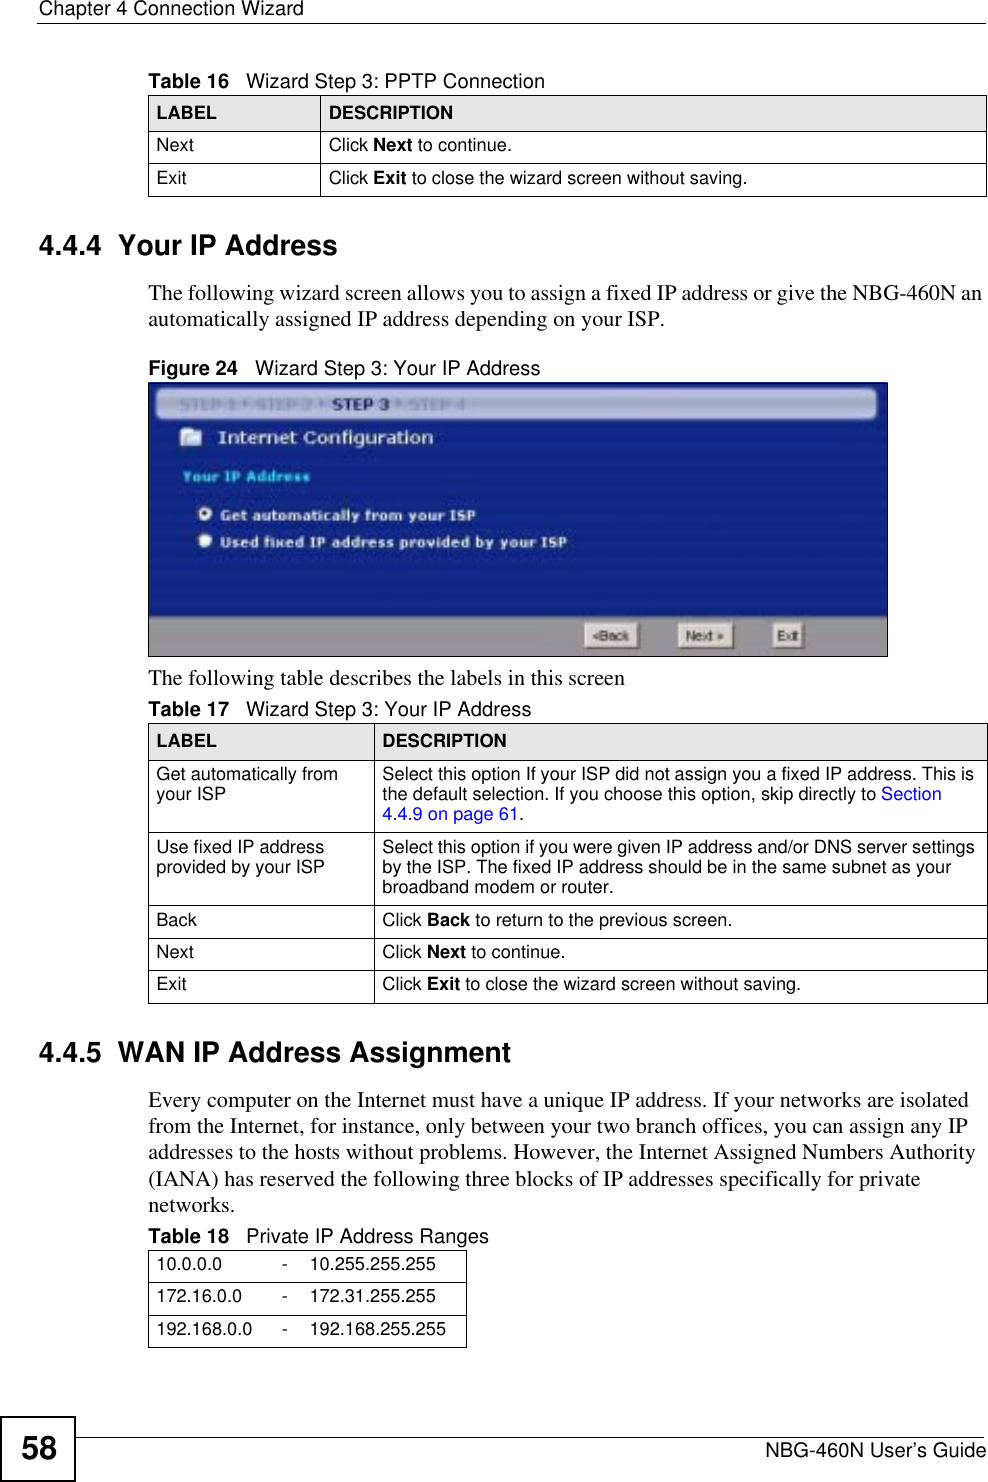 Chapter 4 Connection WizardNBG-460N User’s Guide584.4.4  Your IP AddressThe following wizard screen allows you to assign a fixed IP address or give the NBG-460N an automatically assigned IP address depending on your ISP.Figure 24   Wizard Step 3: Your IP AddressThe following table describes the labels in this screen4.4.5  WAN IP Address AssignmentEvery computer on the Internet must have a unique IP address. If your networks are isolated from the Internet, for instance, only between your two branch offices, you can assign any IP addresses to the hosts without problems. However, the Internet Assigned Numbers Authority (IANA) has reserved the following three blocks of IP addresses specifically for private networks.Next Click Next to continue. Exit Click Exit to close the wizard screen without saving.Table 16   Wizard Step 3: PPTP ConnectionLABEL DESCRIPTIONTable 17   Wizard Step 3: Your IP AddressLABEL DESCRIPTIONGet automatically from your ISP  Select this option If your ISP did not assign you a fixed IP address. This is the default selection. If you choose this option, skip directly to Section4.4.9 on page 61.Use fixed IP address provided by your ISP Select this option if you were given IP address and/or DNS server settings by the ISP. The fixed IP address should be in the same subnet as your broadband modem or router. Back Click Back to return to the previous screen.Next Click Next to continue. Exit Click Exit to close the wizard screen without saving.Table 18   Private IP Address Ranges10.0.0.0 -10.255.255.255172.16.0.0 -172.31.255.255192.168.0.0 -192.168.255.255